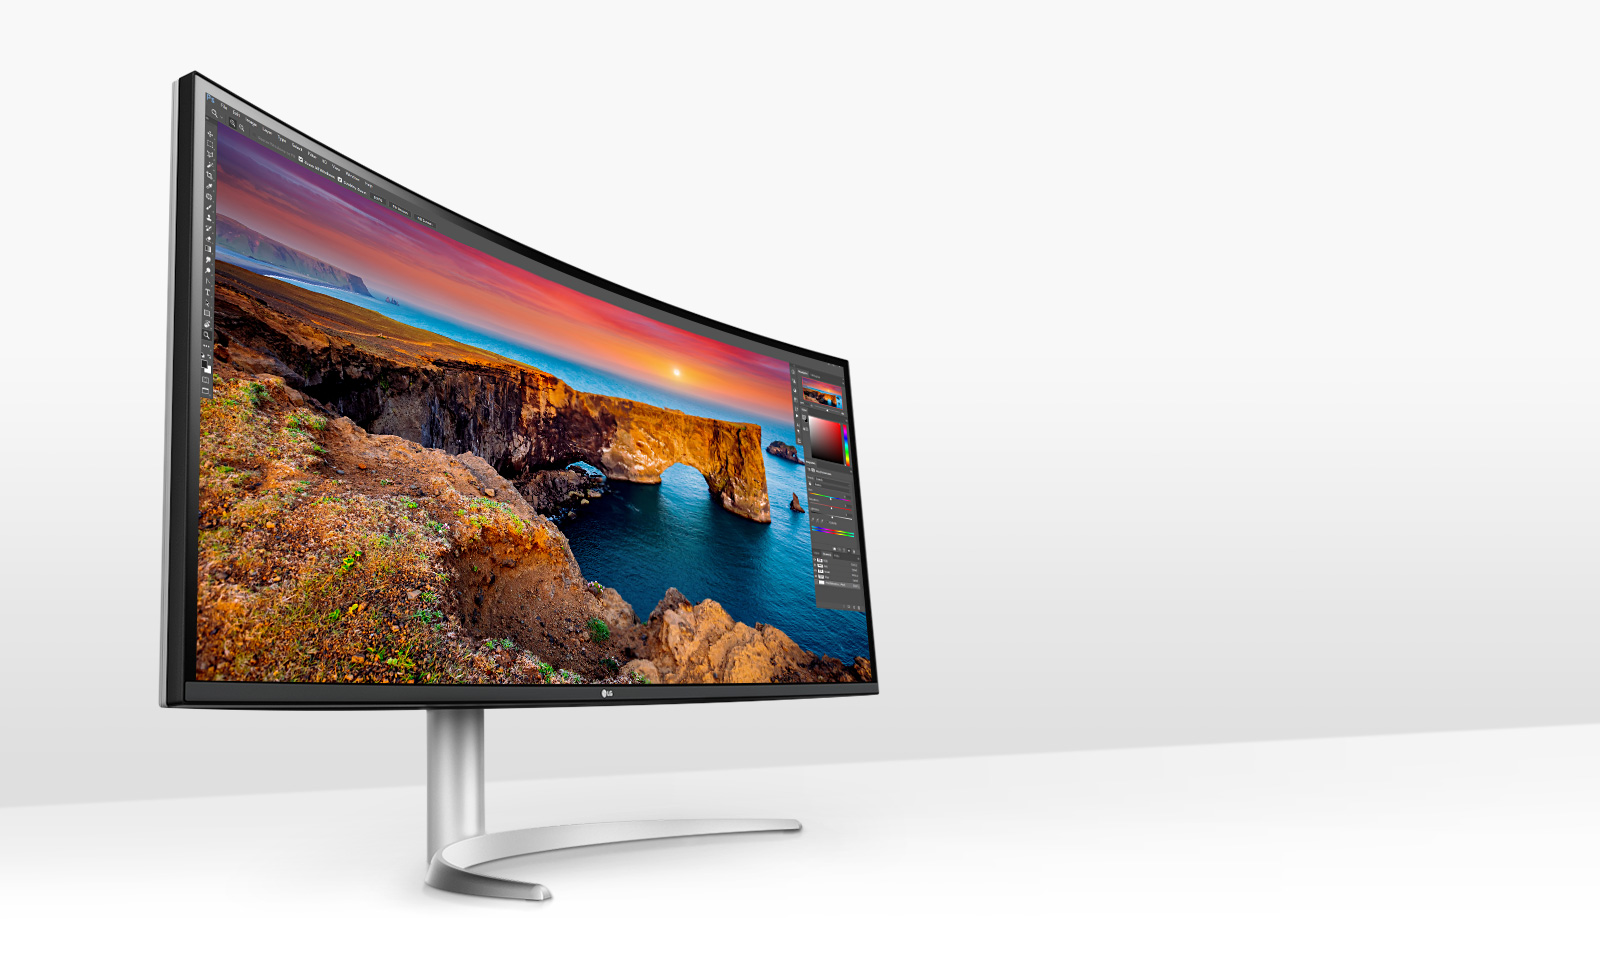 Nano IPS™ Display supports a wide color spectrum with 98% of DCI-P3 color gamut and HDR10.